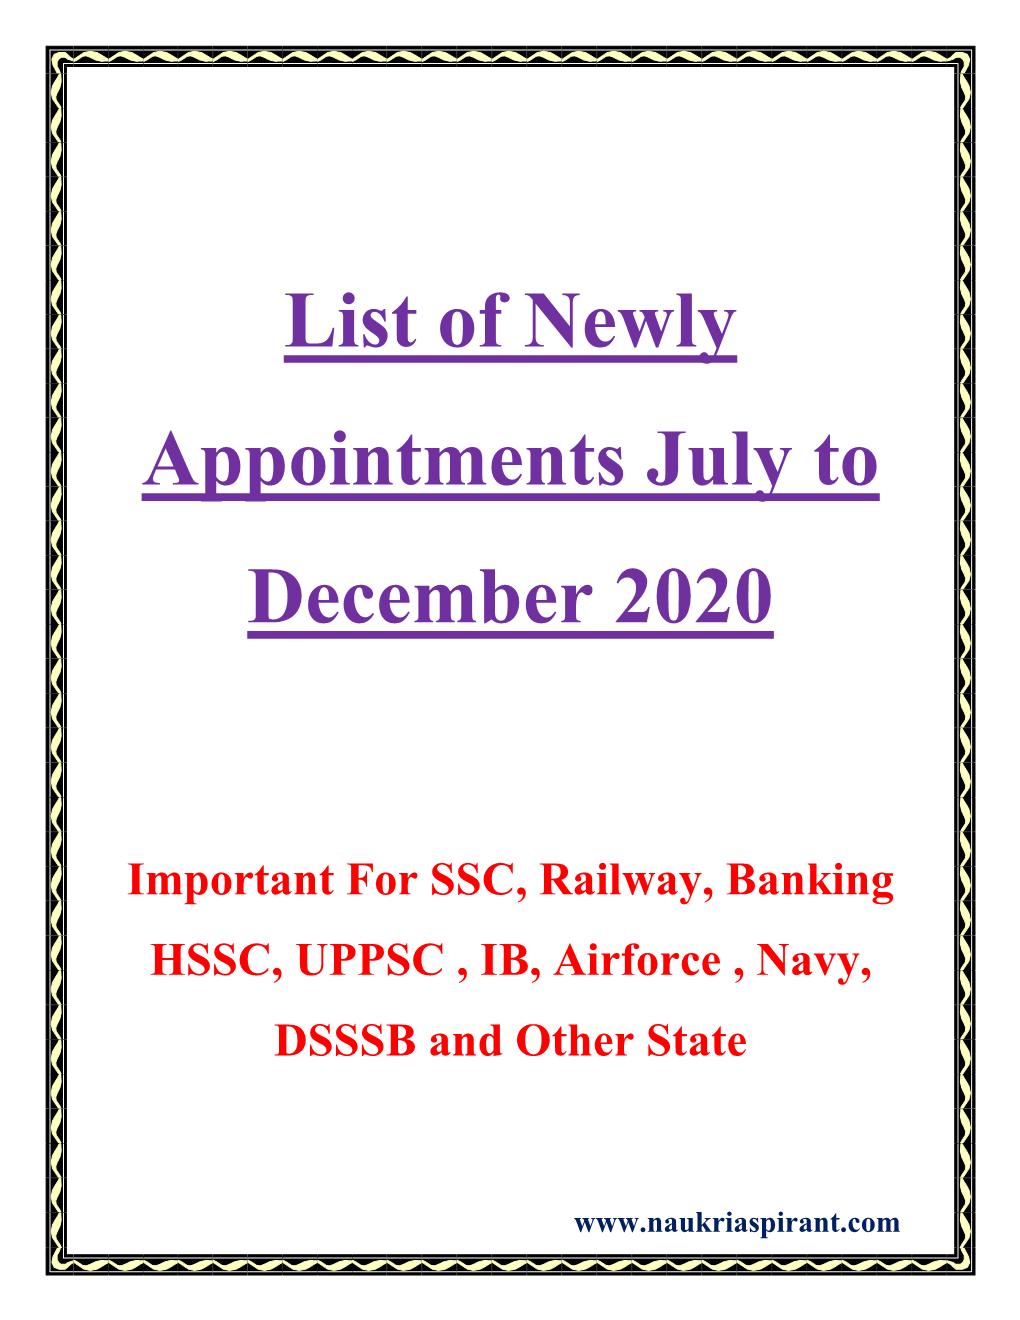 List of Newly Appointments July to December 2020